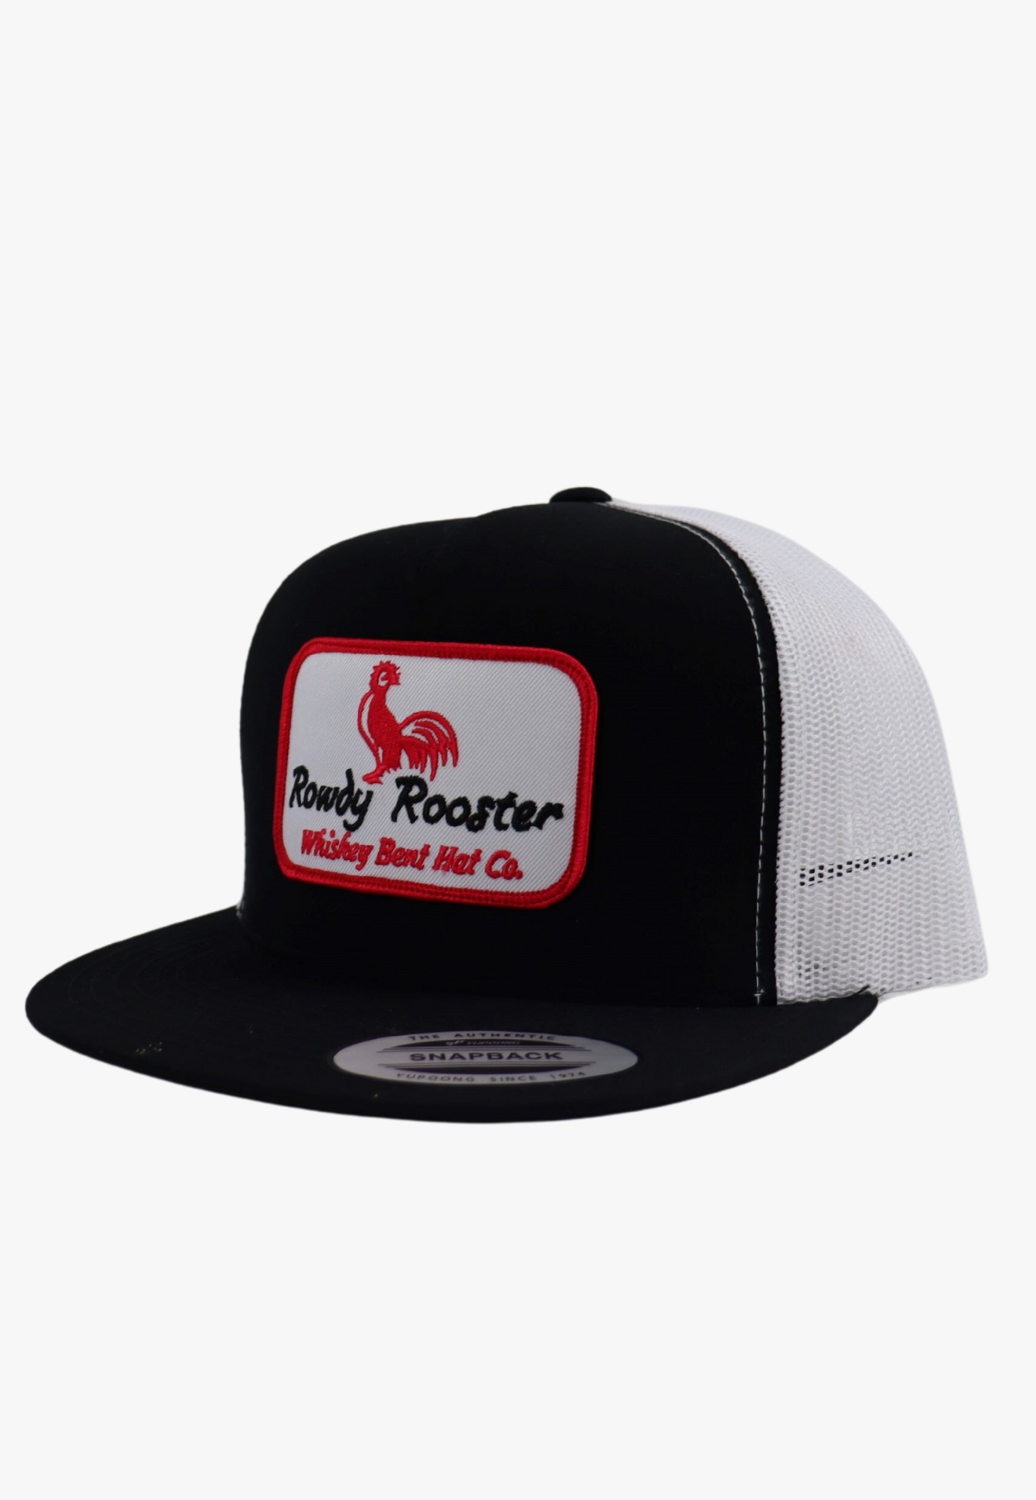 Whiskey Bent Hat Co Rowdy Rooster Trucker Cap